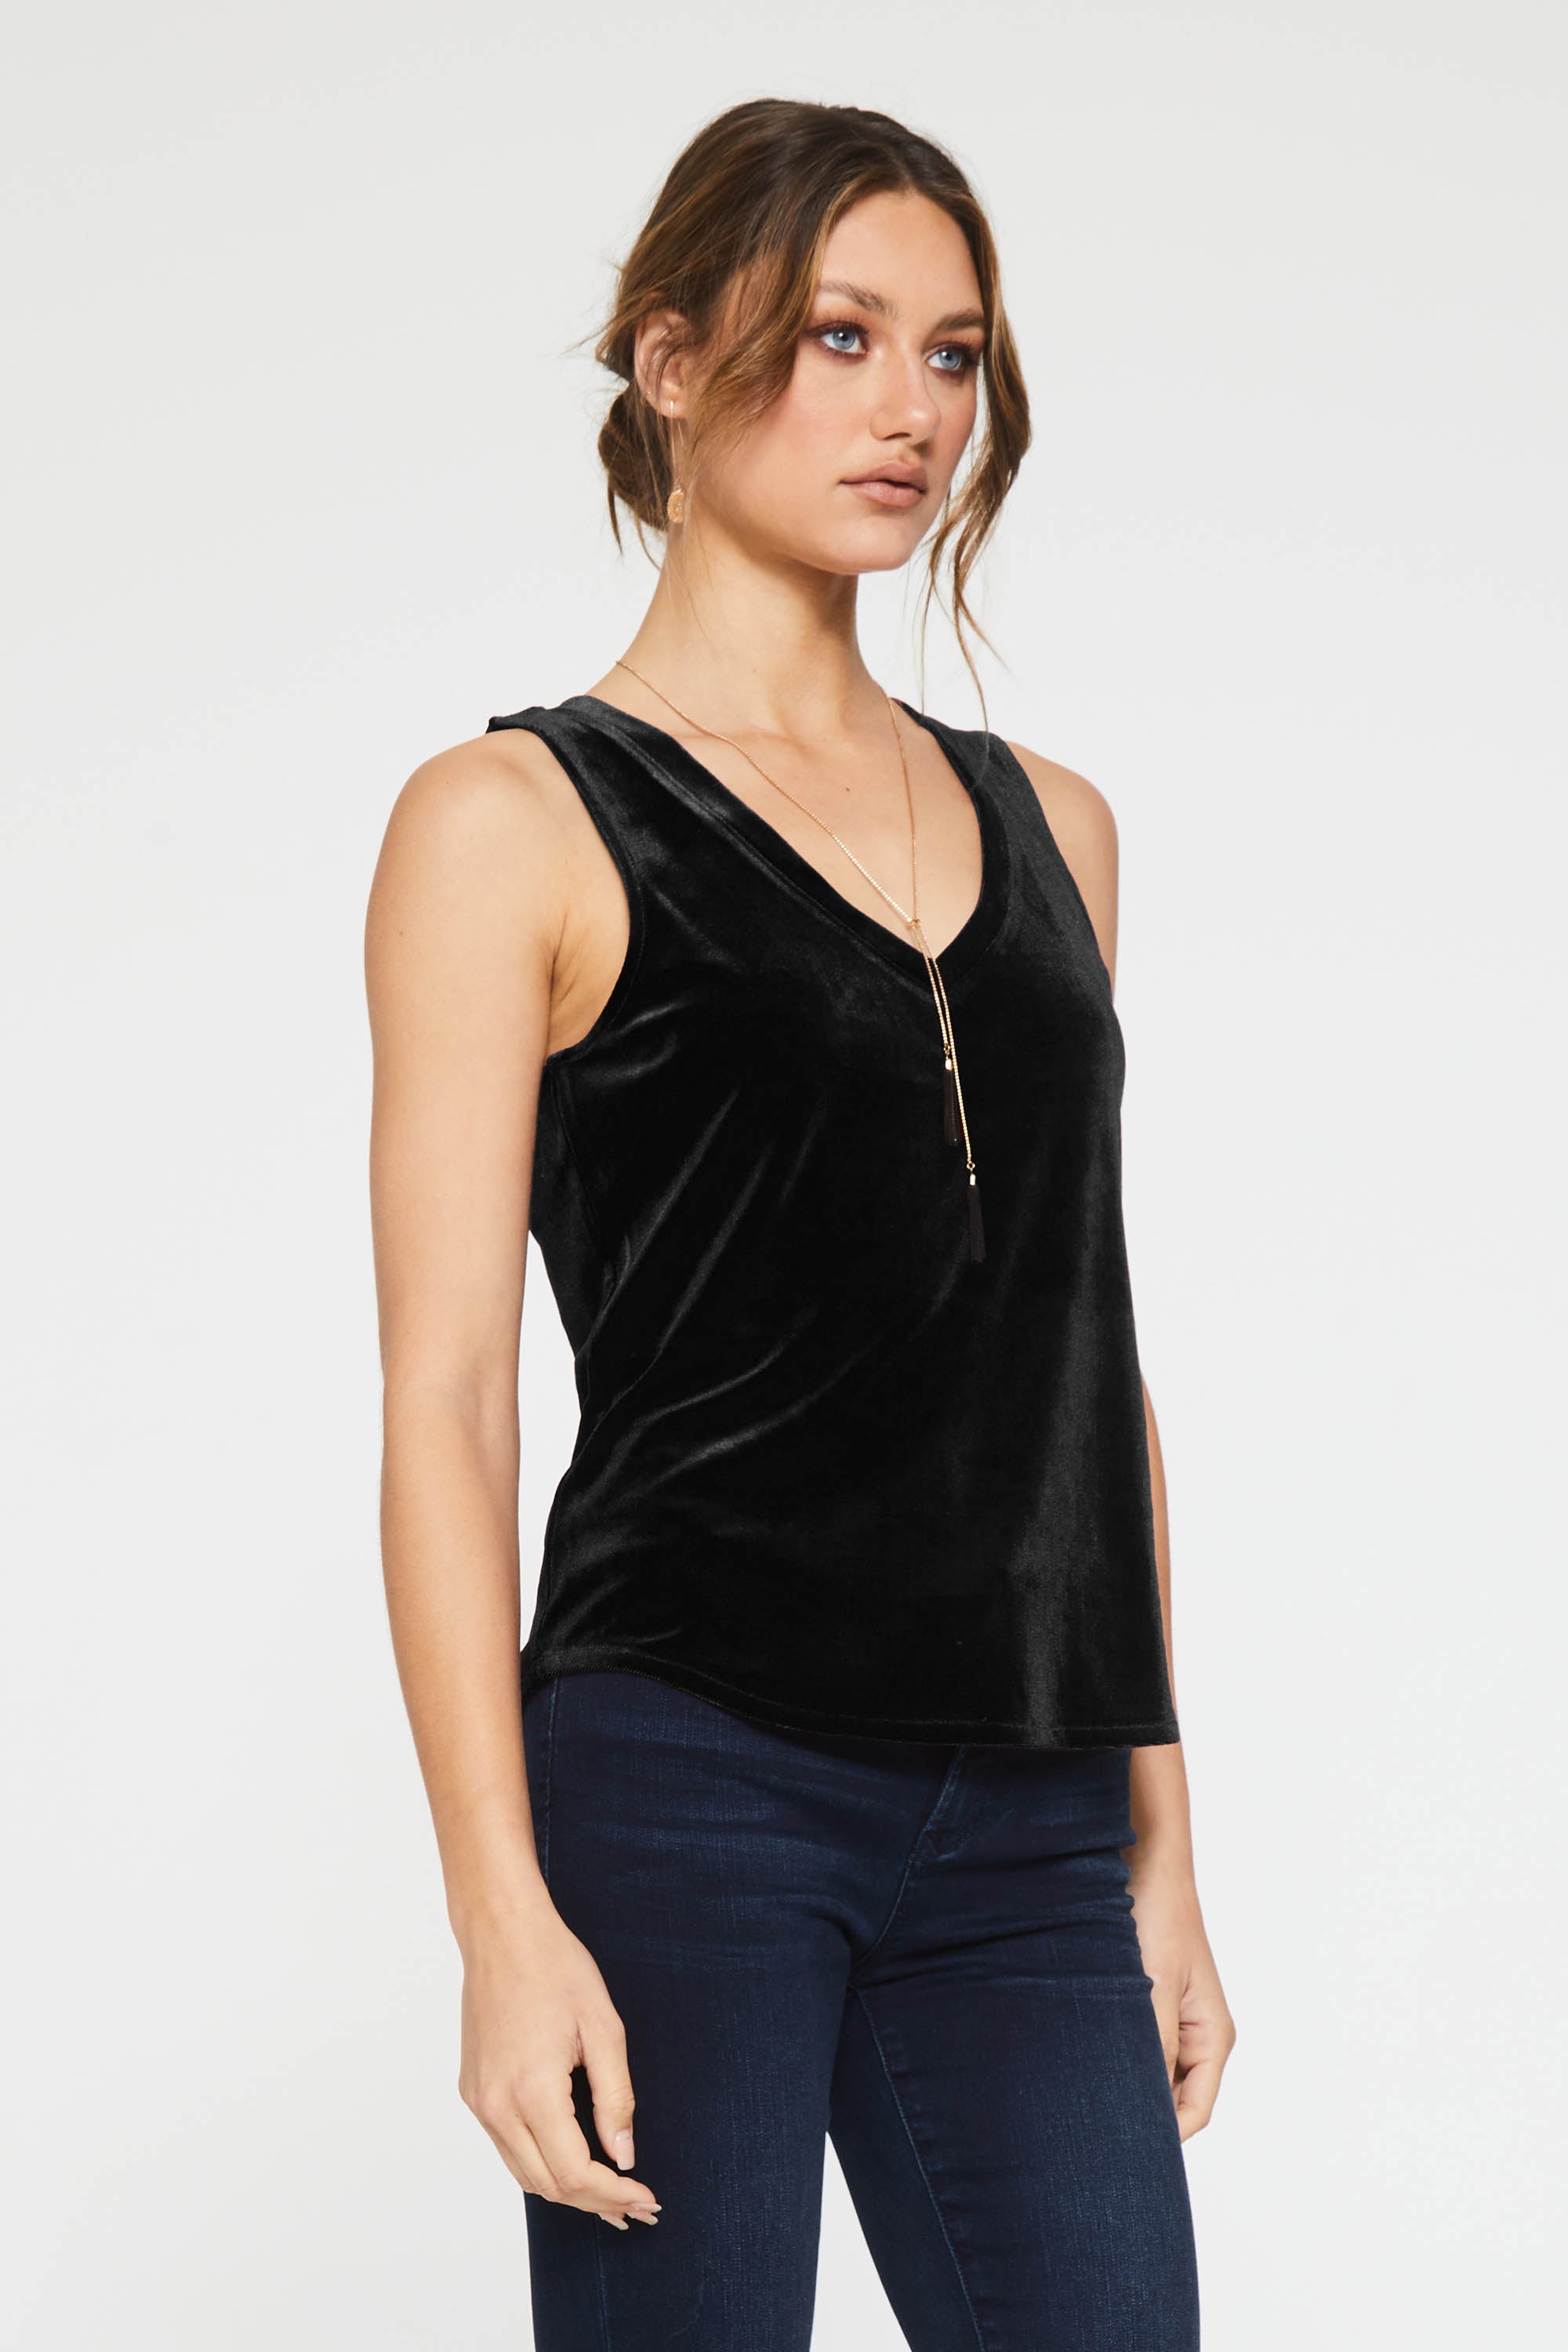 acacia-vneck-tank-black-side-image-another-love-clothing